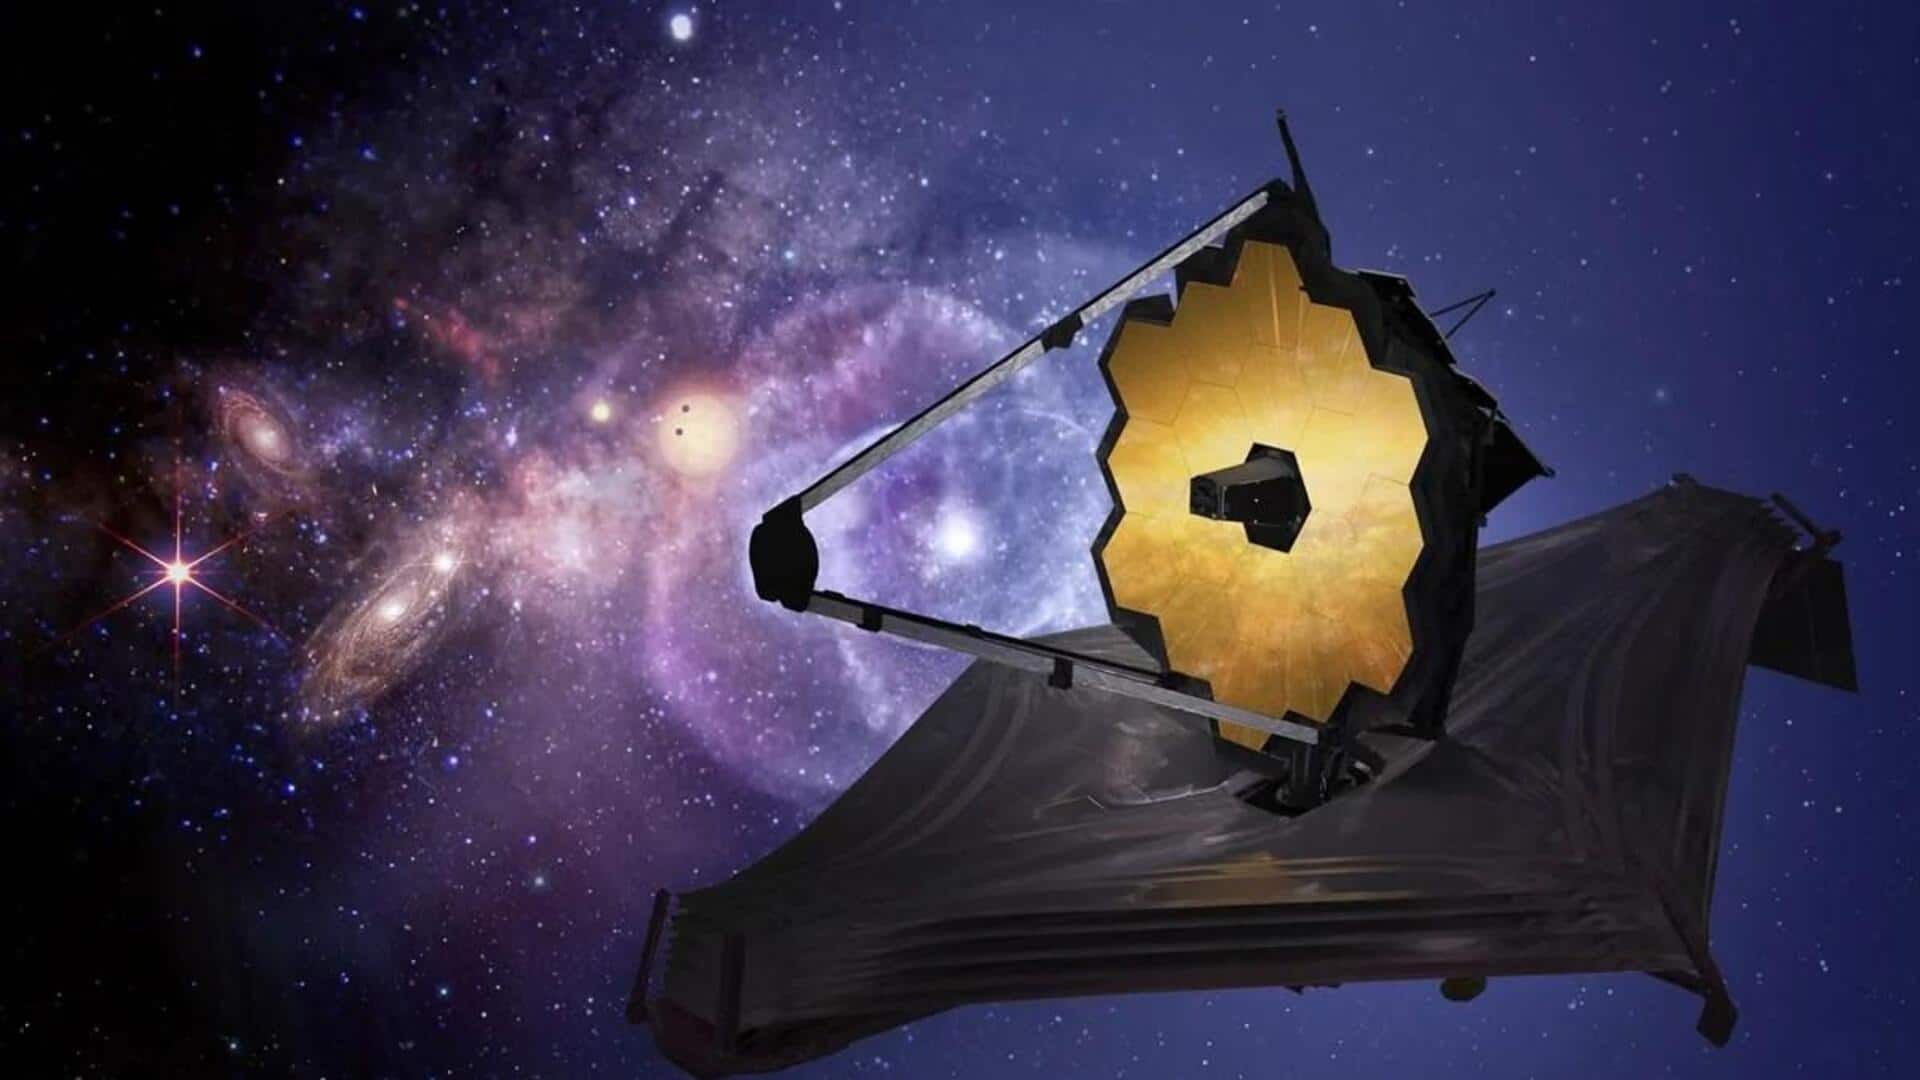 Are we alone? JWST could spark revolution in exoplanet studies